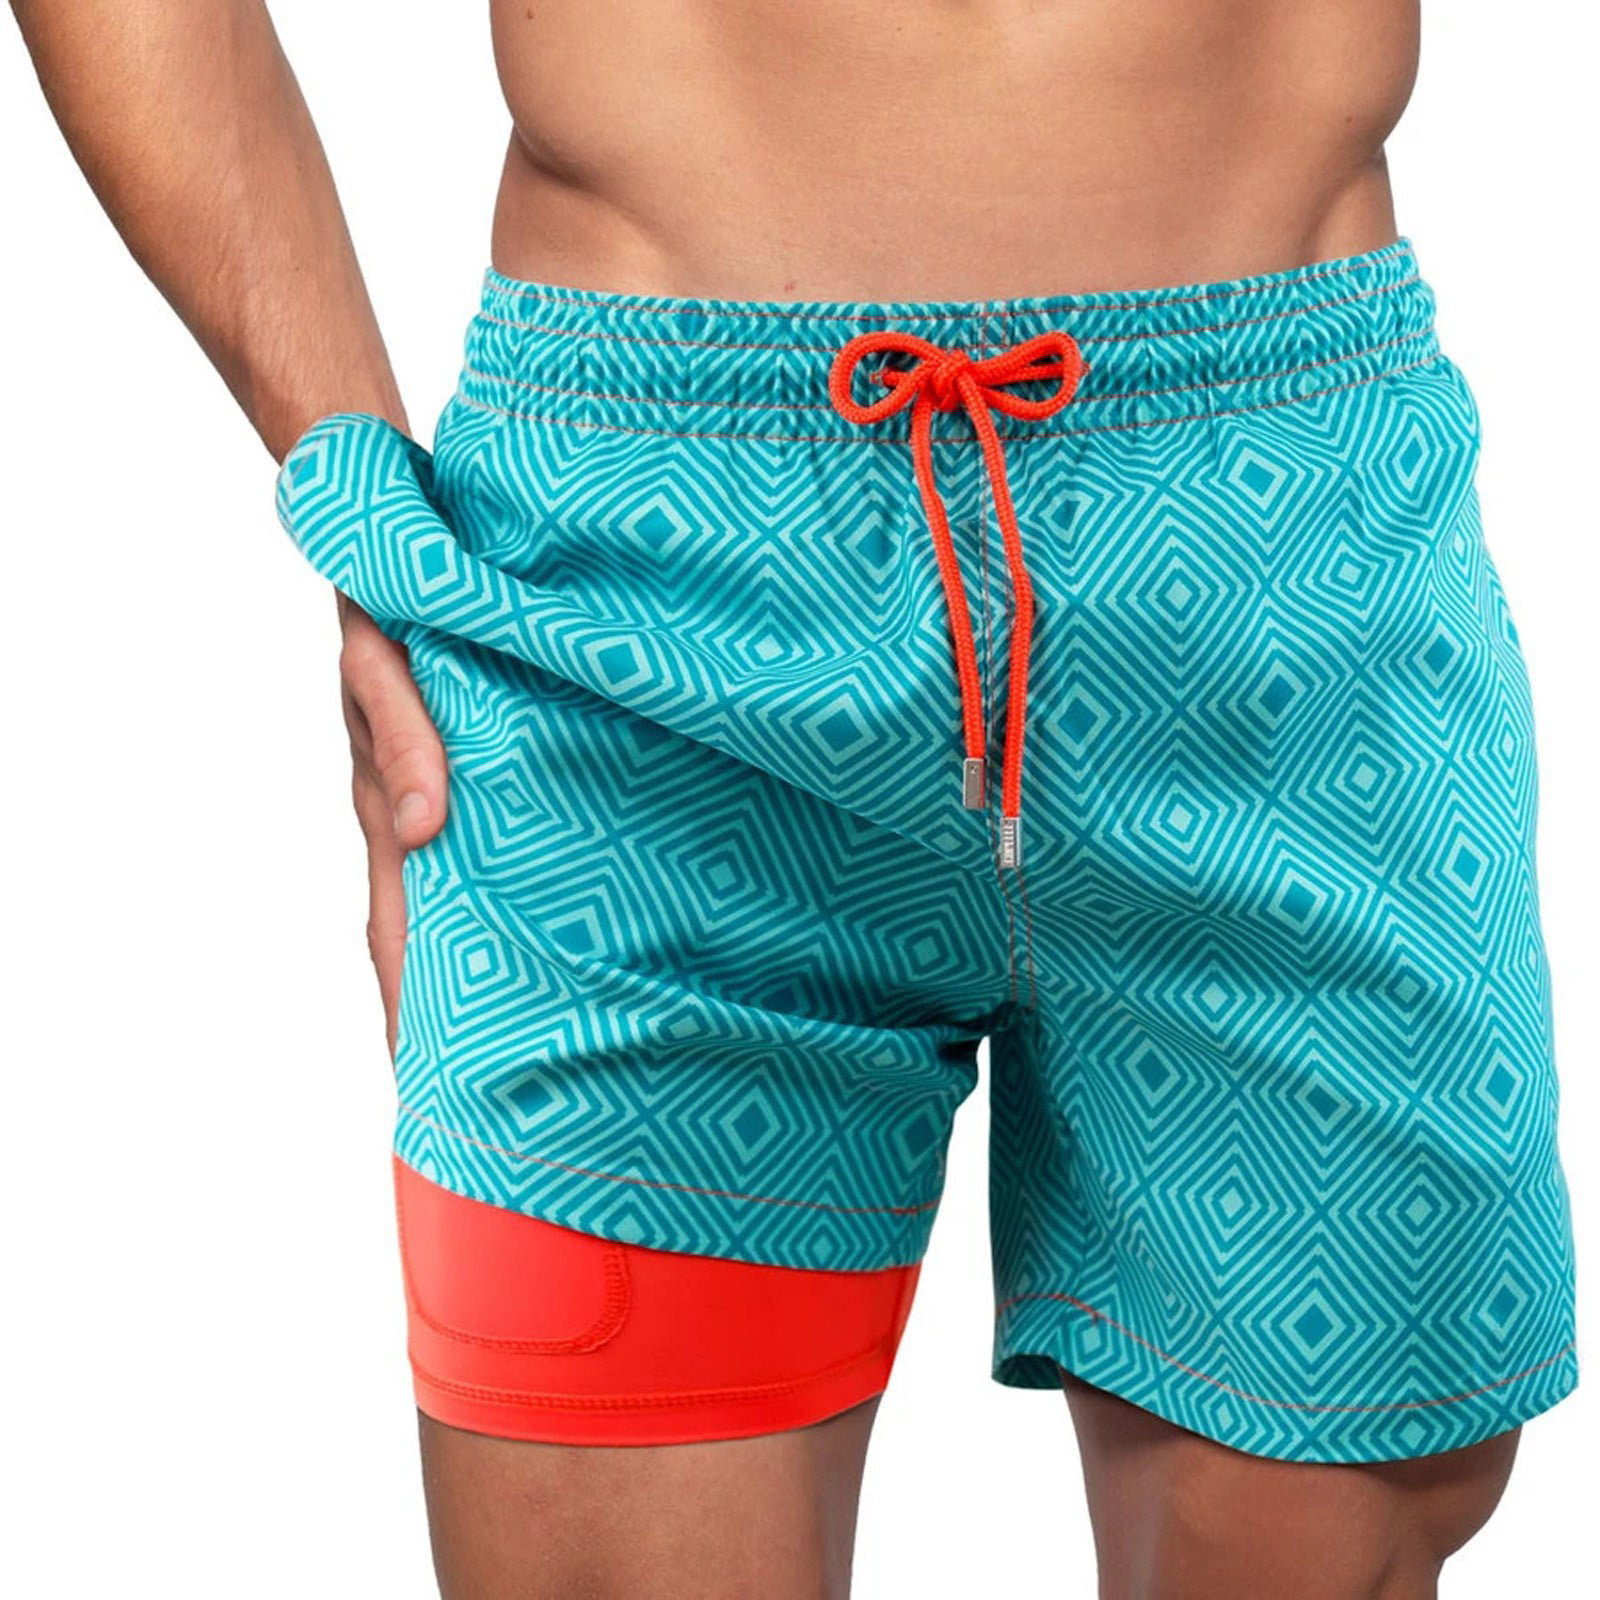 JERECY Mens Swim Trunks Beach Kids Play Educational Game Quick Dry Board Shorts with Drawstring and Pockets